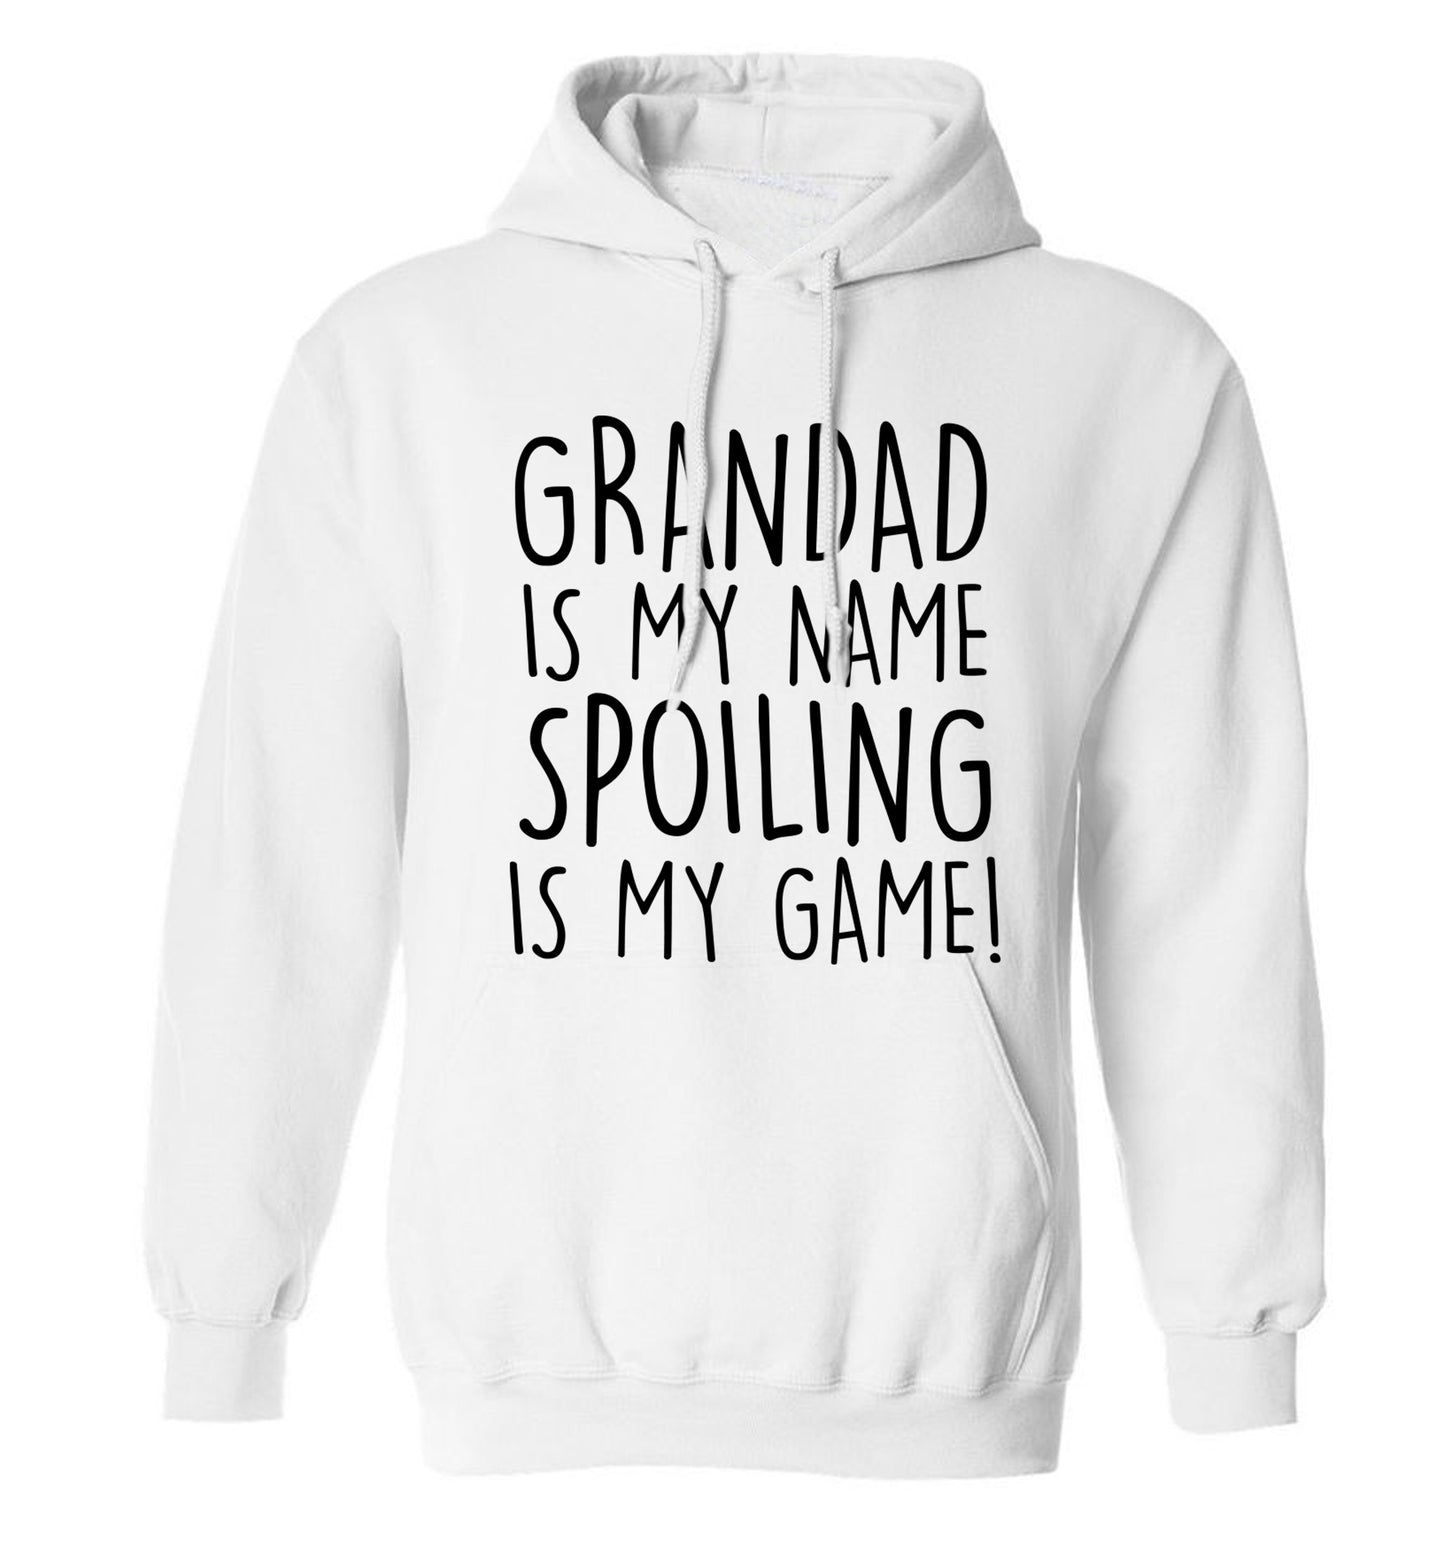 Grandad is my name, spoiling is my game adults unisex white hoodie 2XL